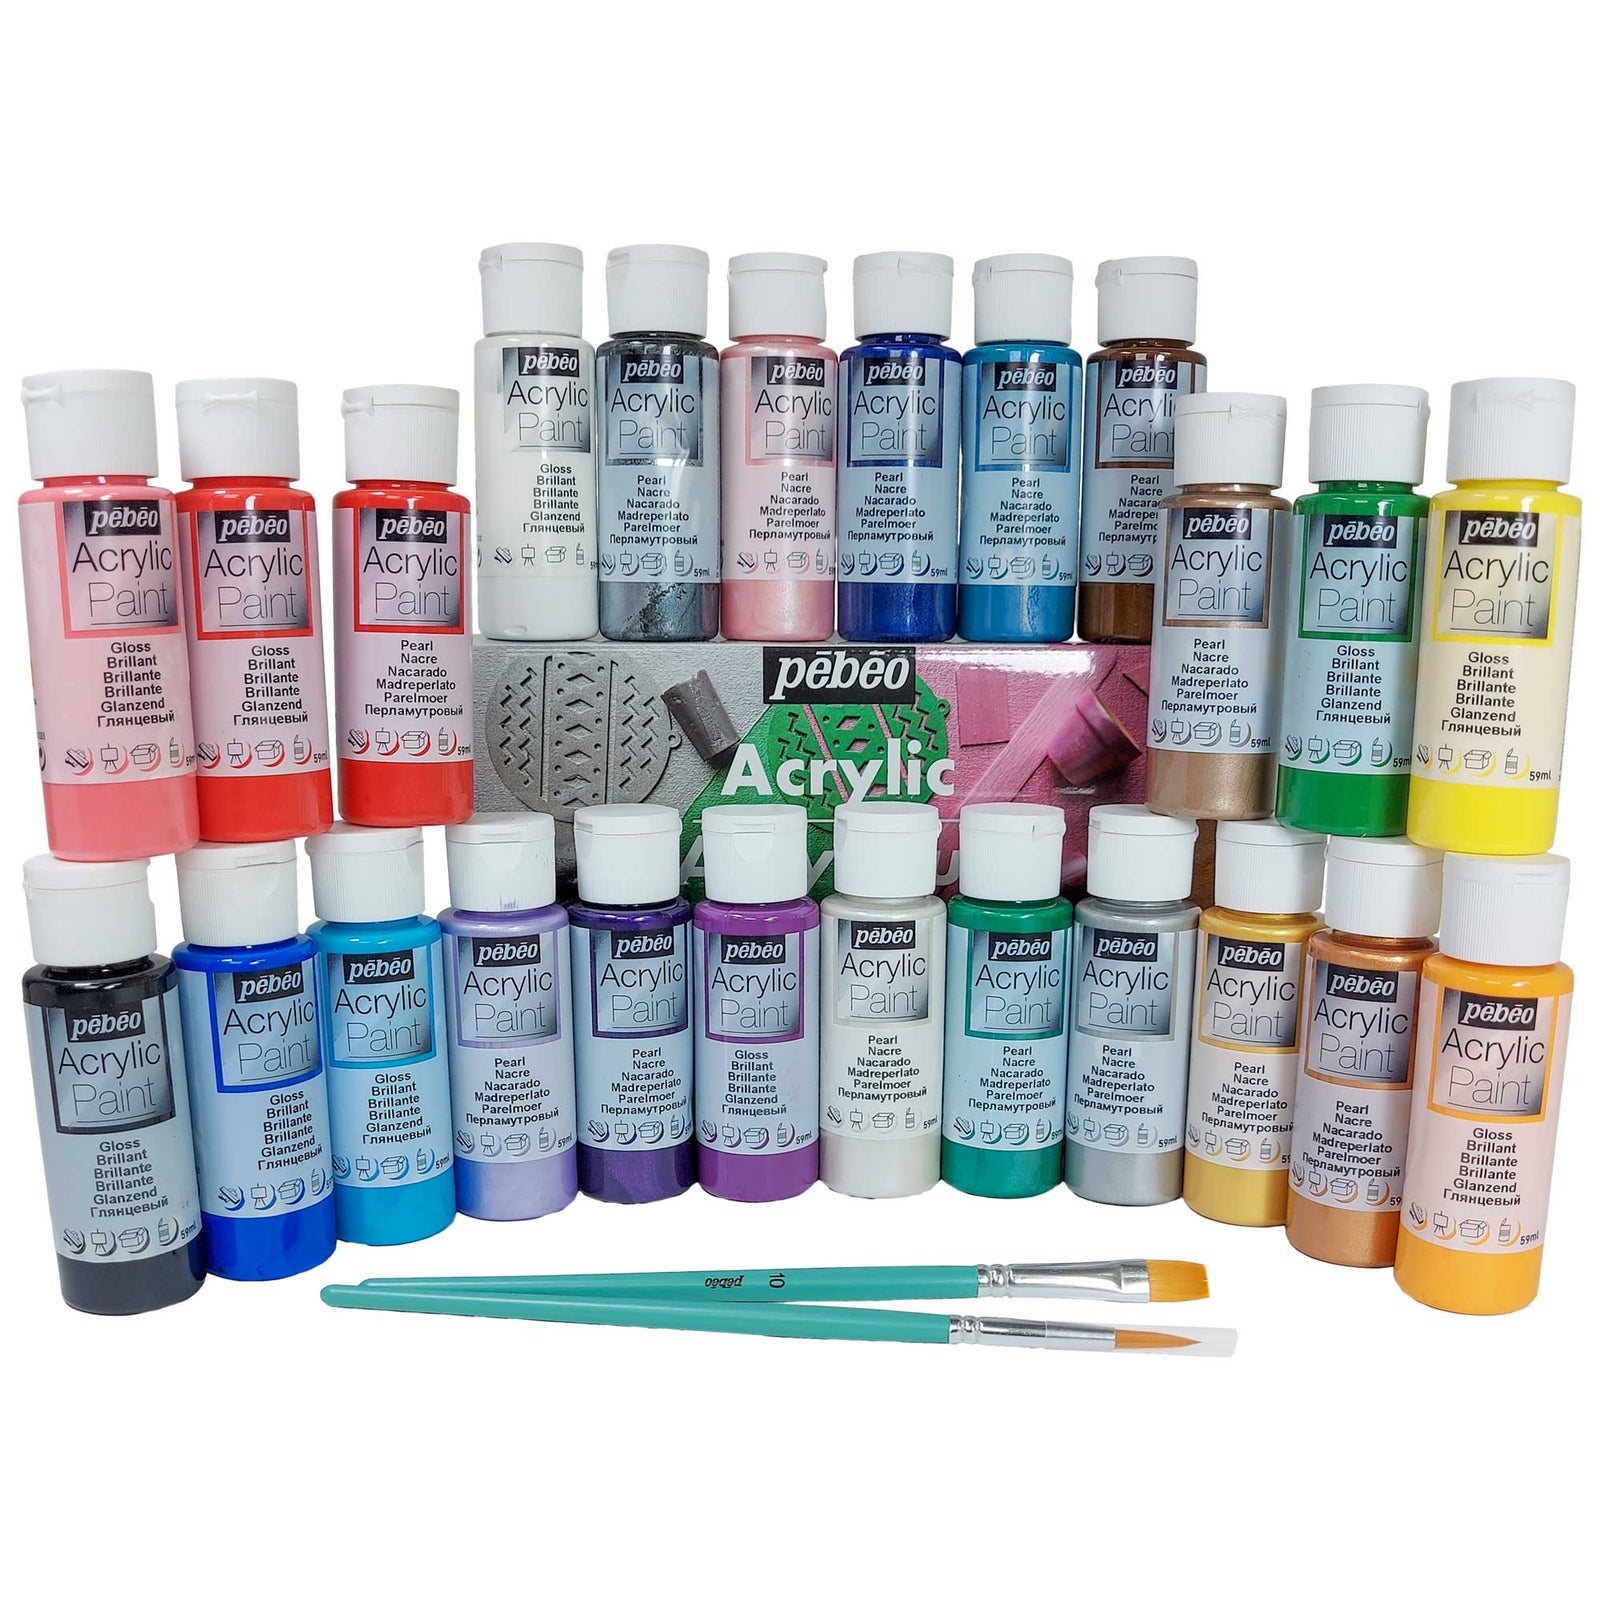 Buy Artists Paint Sets online from ARTdiscount